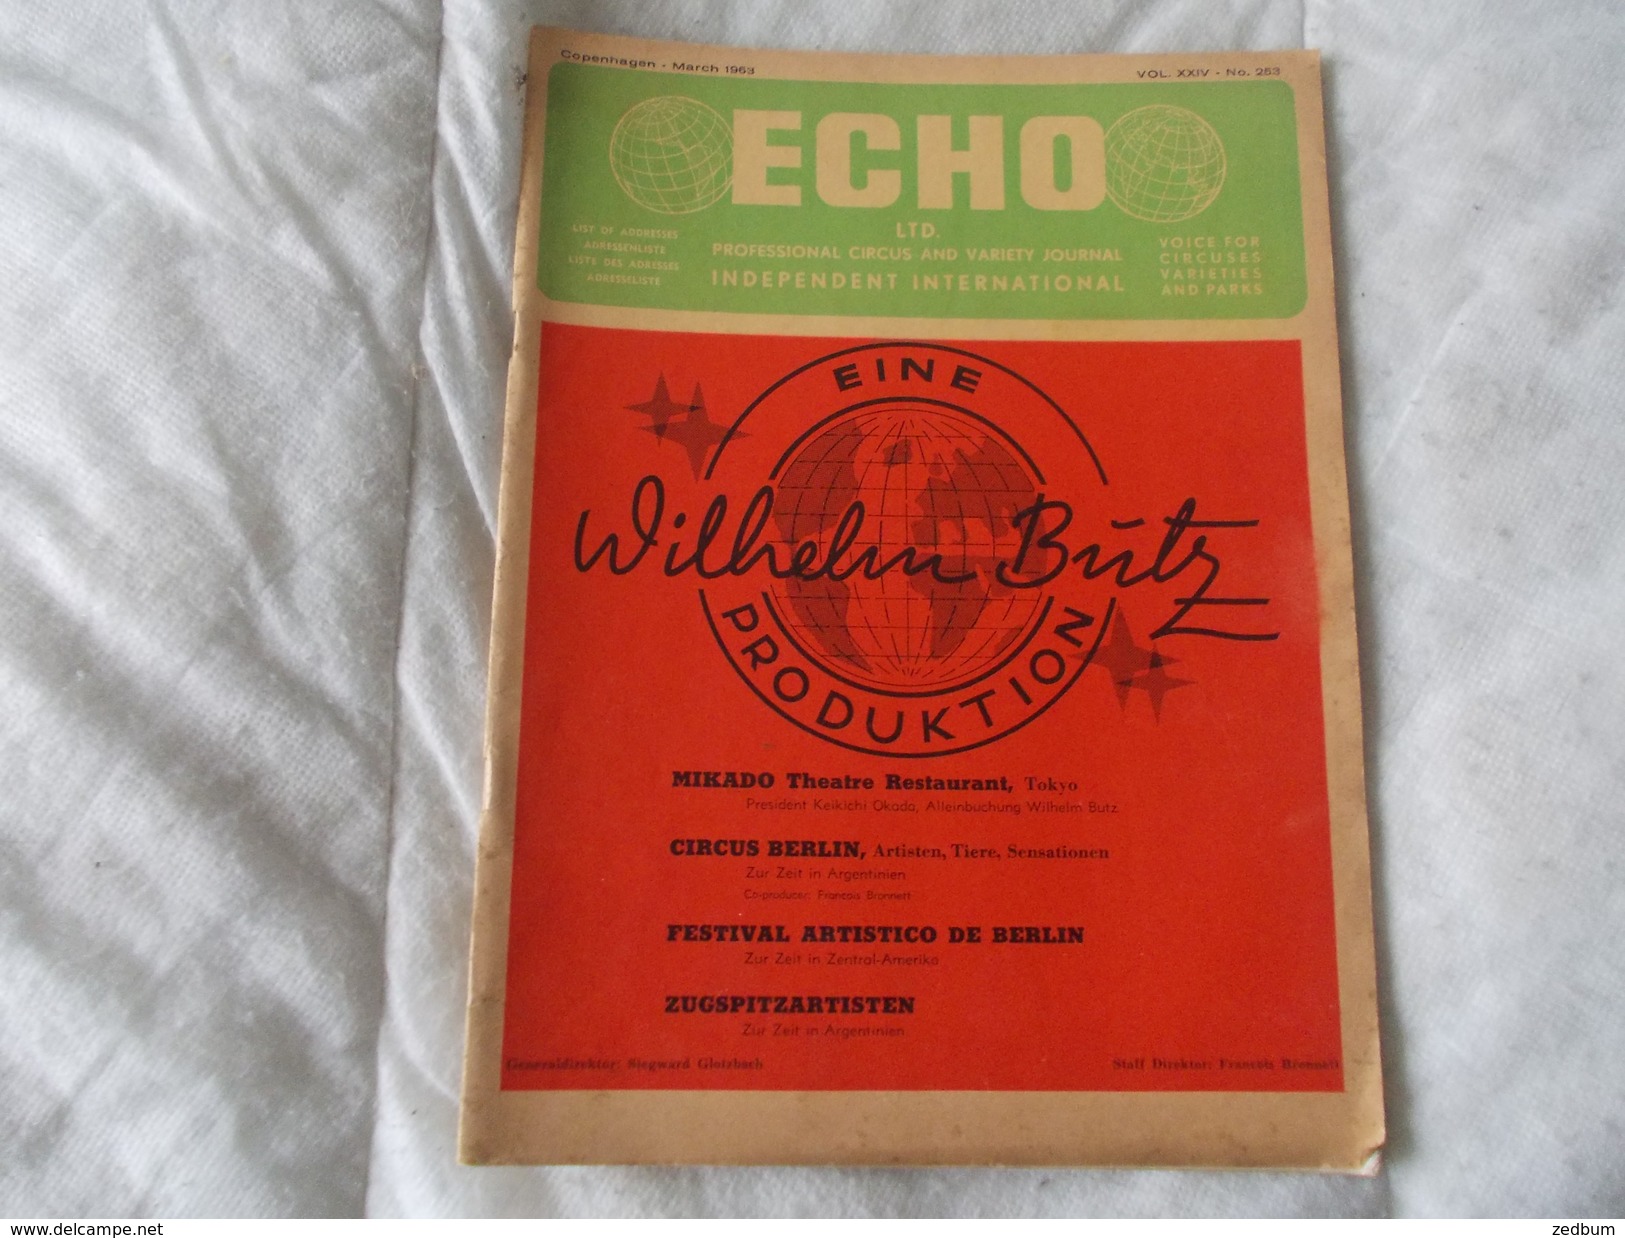 ECHO LTD Professional Circus And Variety Journal Independent International N° 253 March 1963 - Divertissement